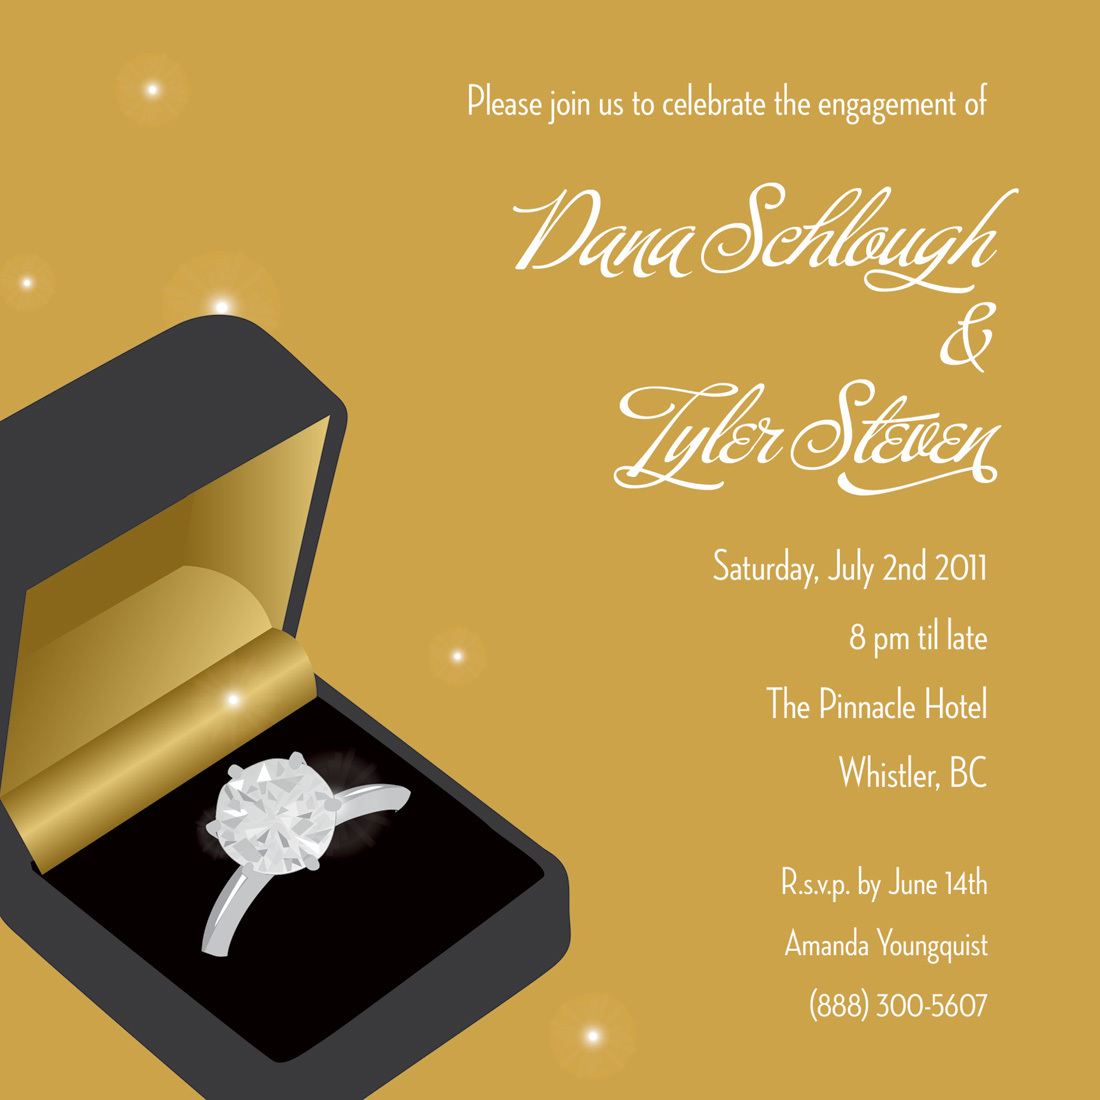 Beautiful Wedding Invitation Card Stock Illustration - Download Image Now -  Backgrounds, Wedding Ring, Bright - iStock